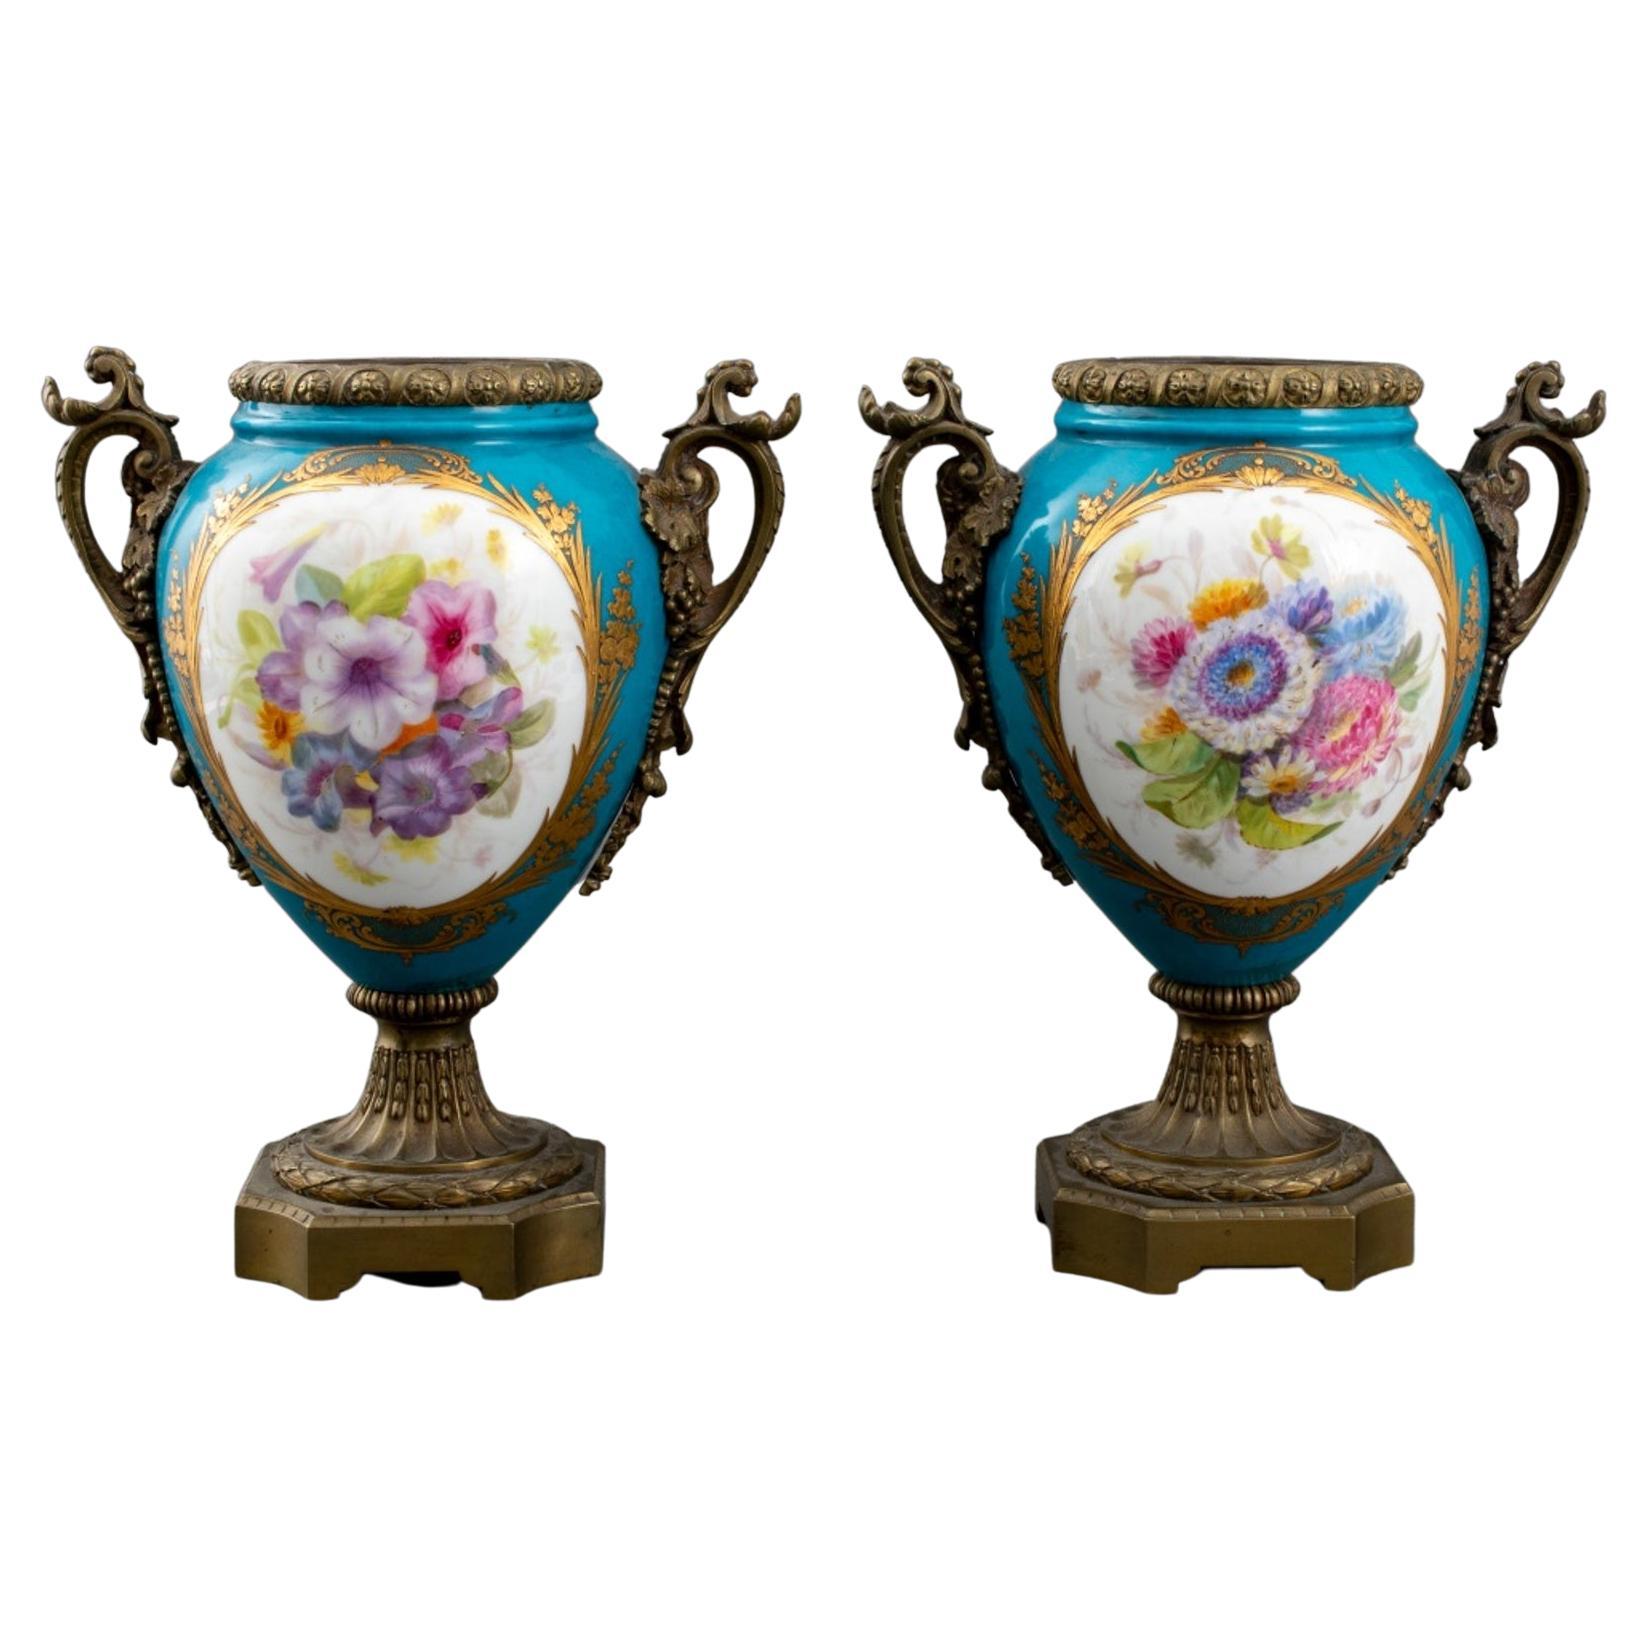 19th C. Sevres Style Giltmetal Mounted Vases, Pair